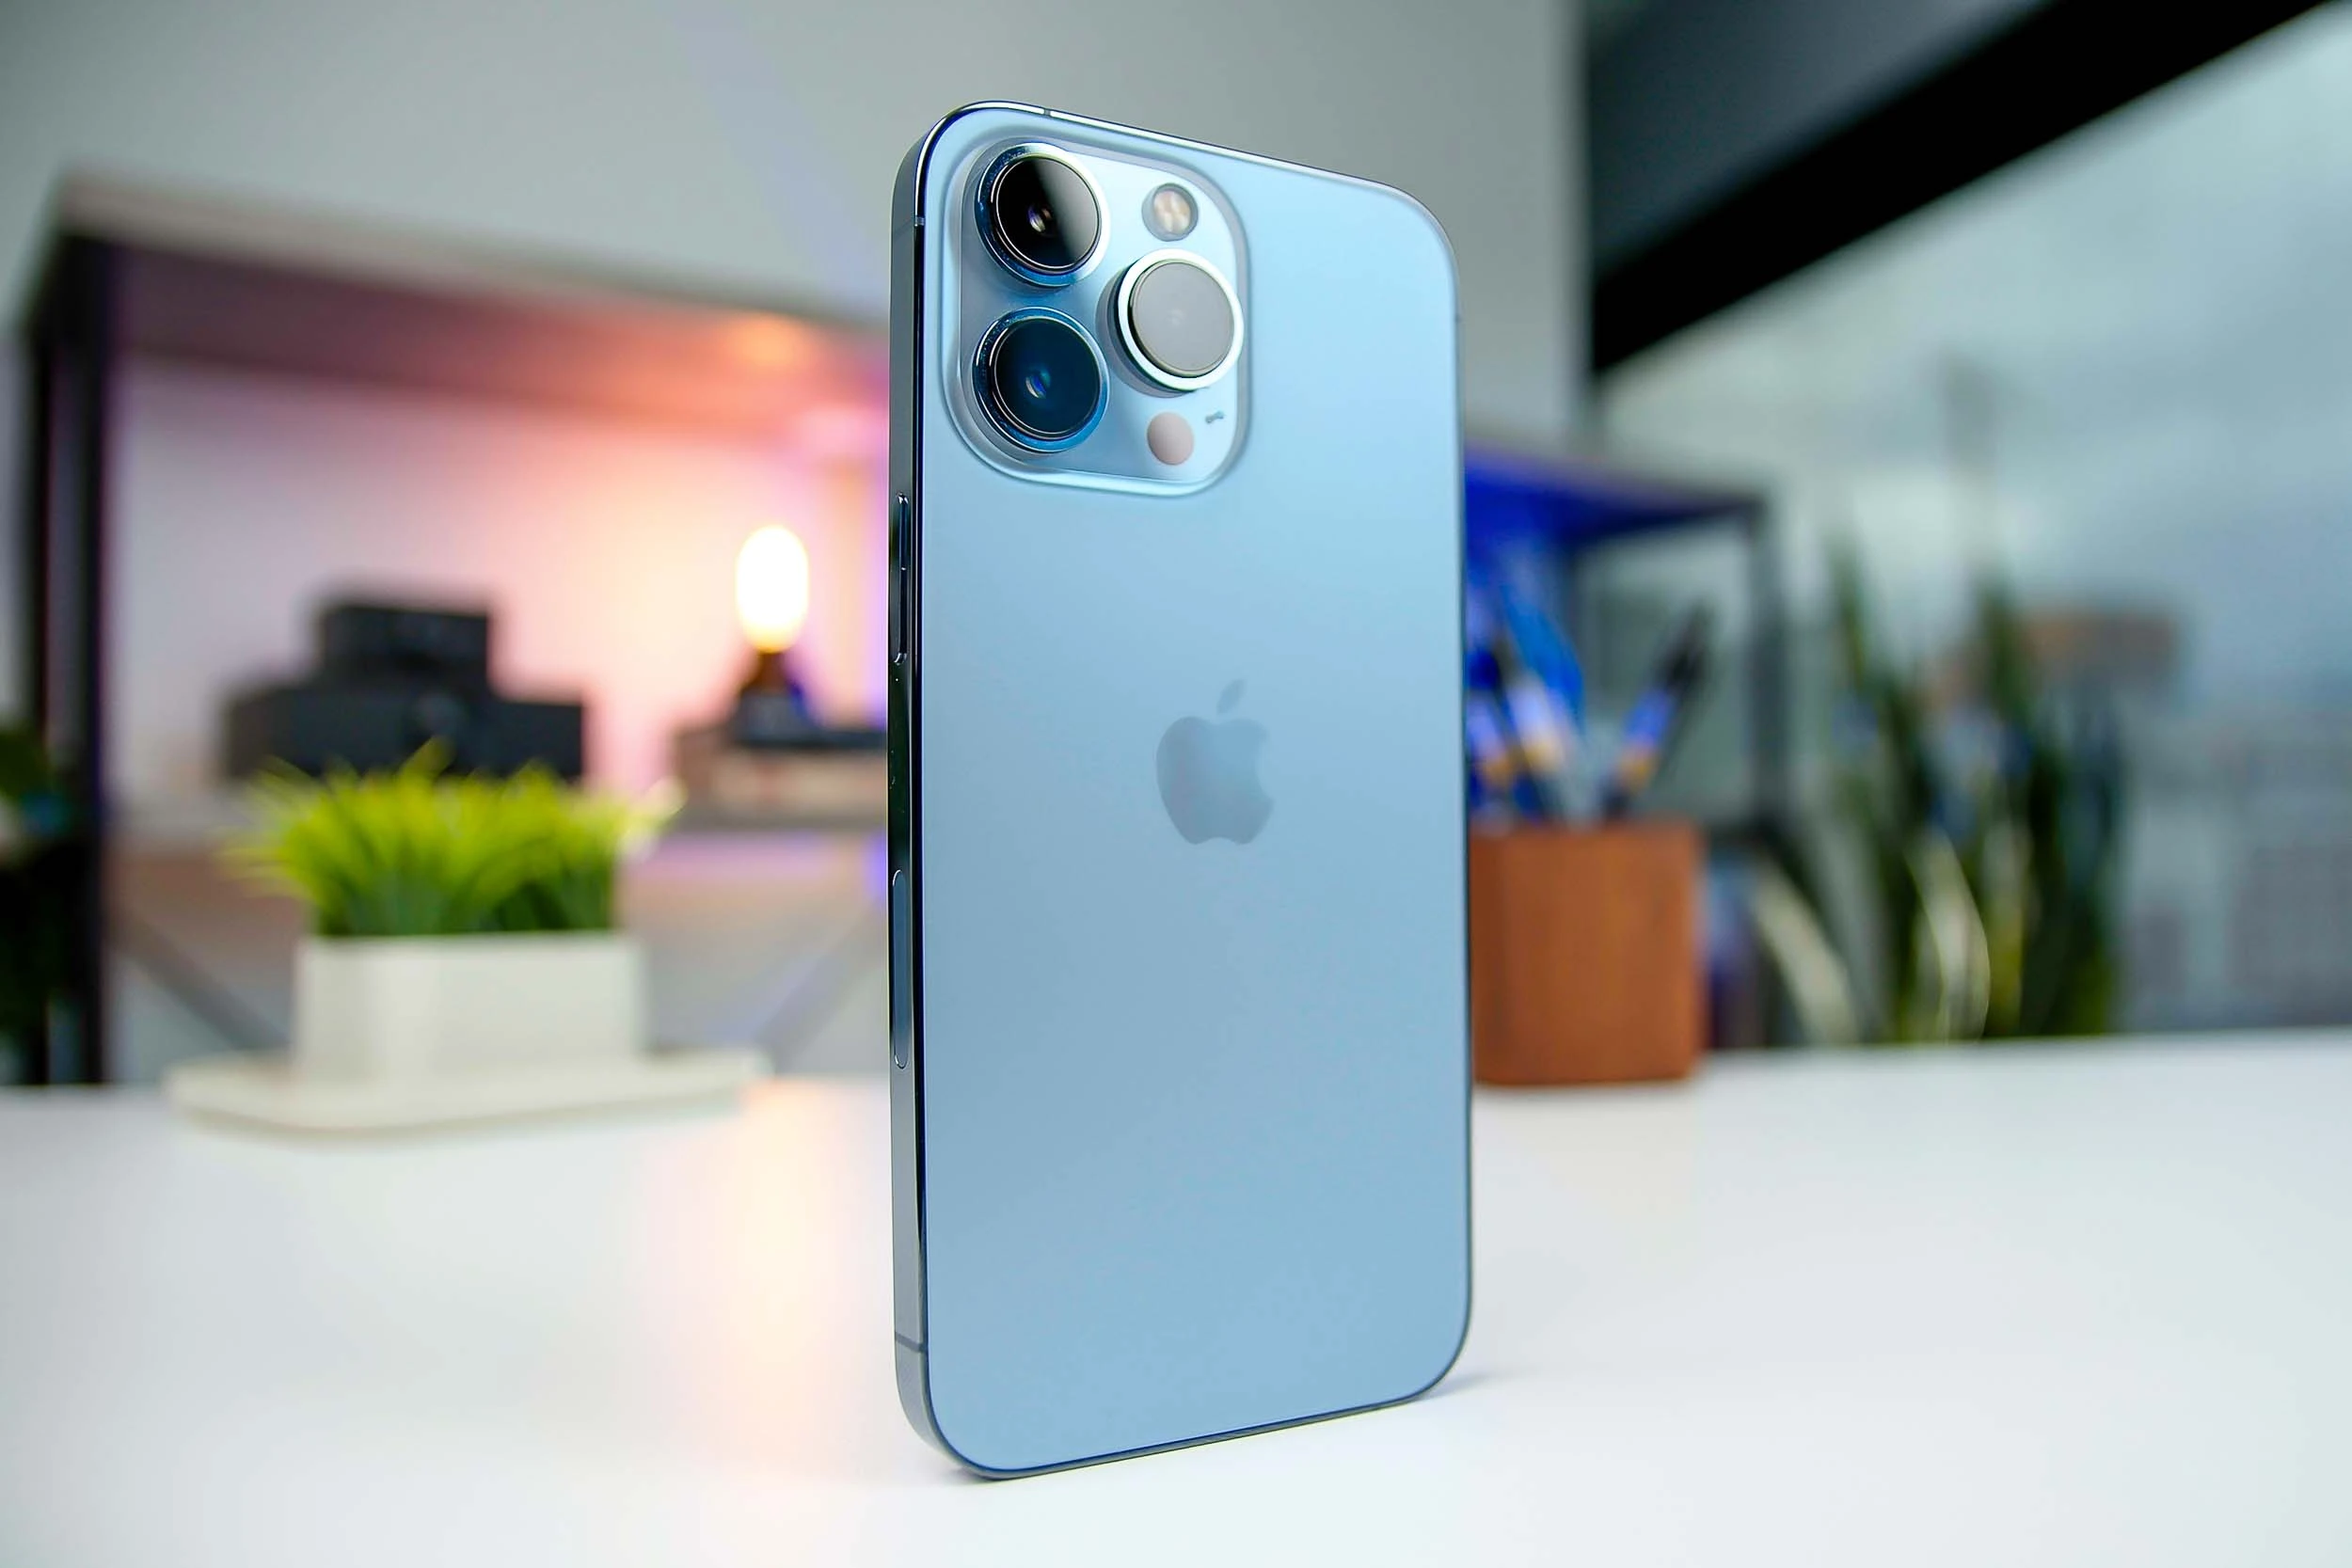 Elevate Your Mobile World: iPhone 13 Pro - Stunning Design and Display